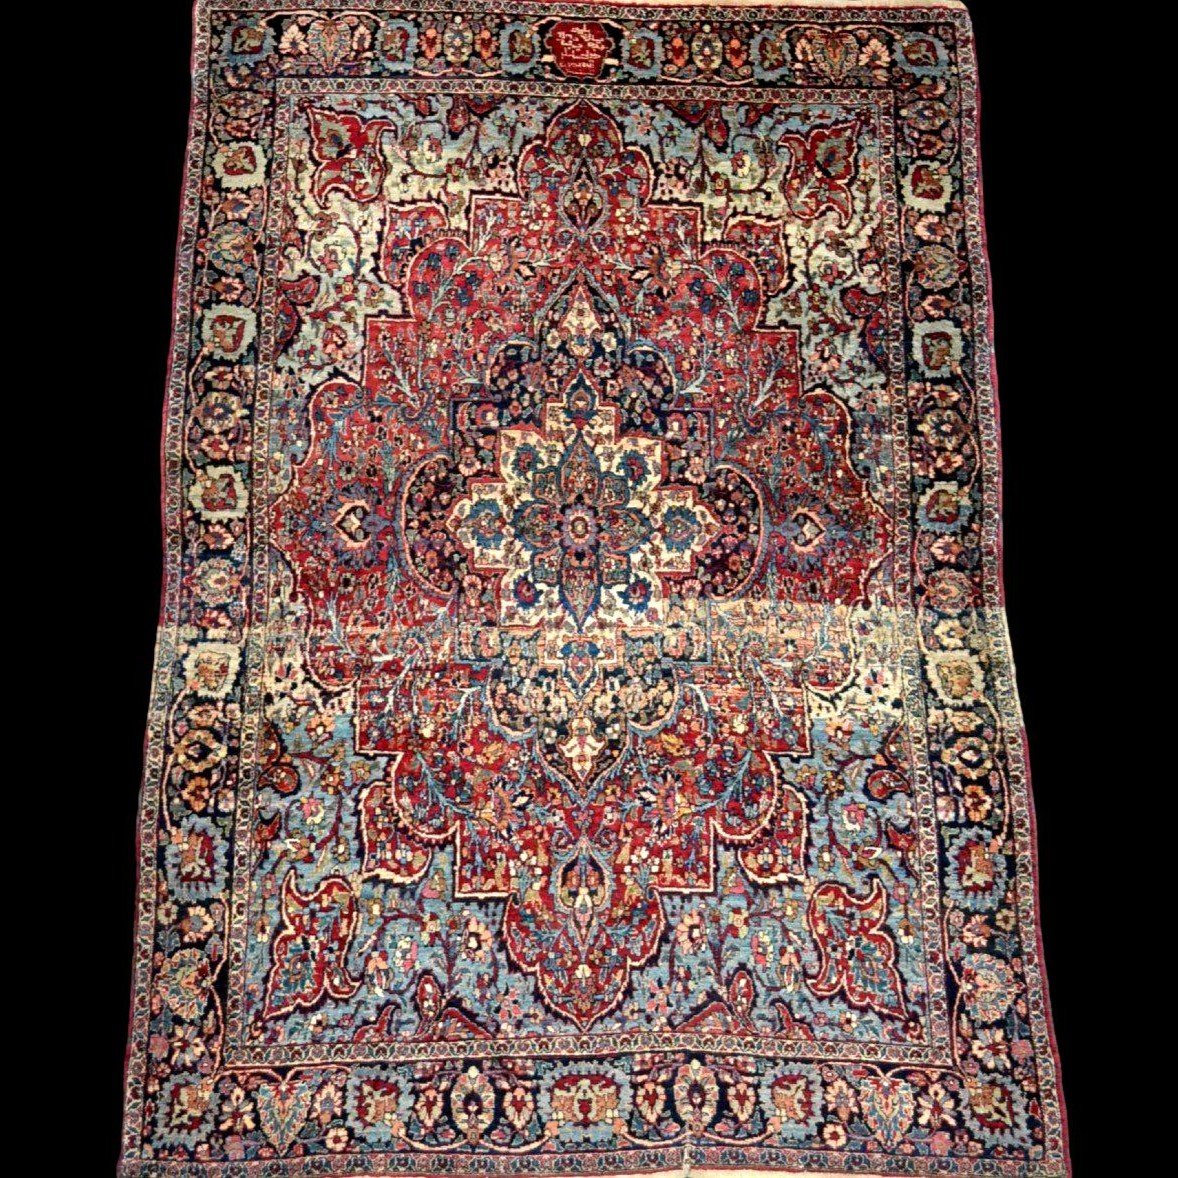 Old Ghoum Rug, 135 Cm X 197 Cm, Signed, Dated, Hand-knotted Wool & Silk, Iran, Very Good Condition